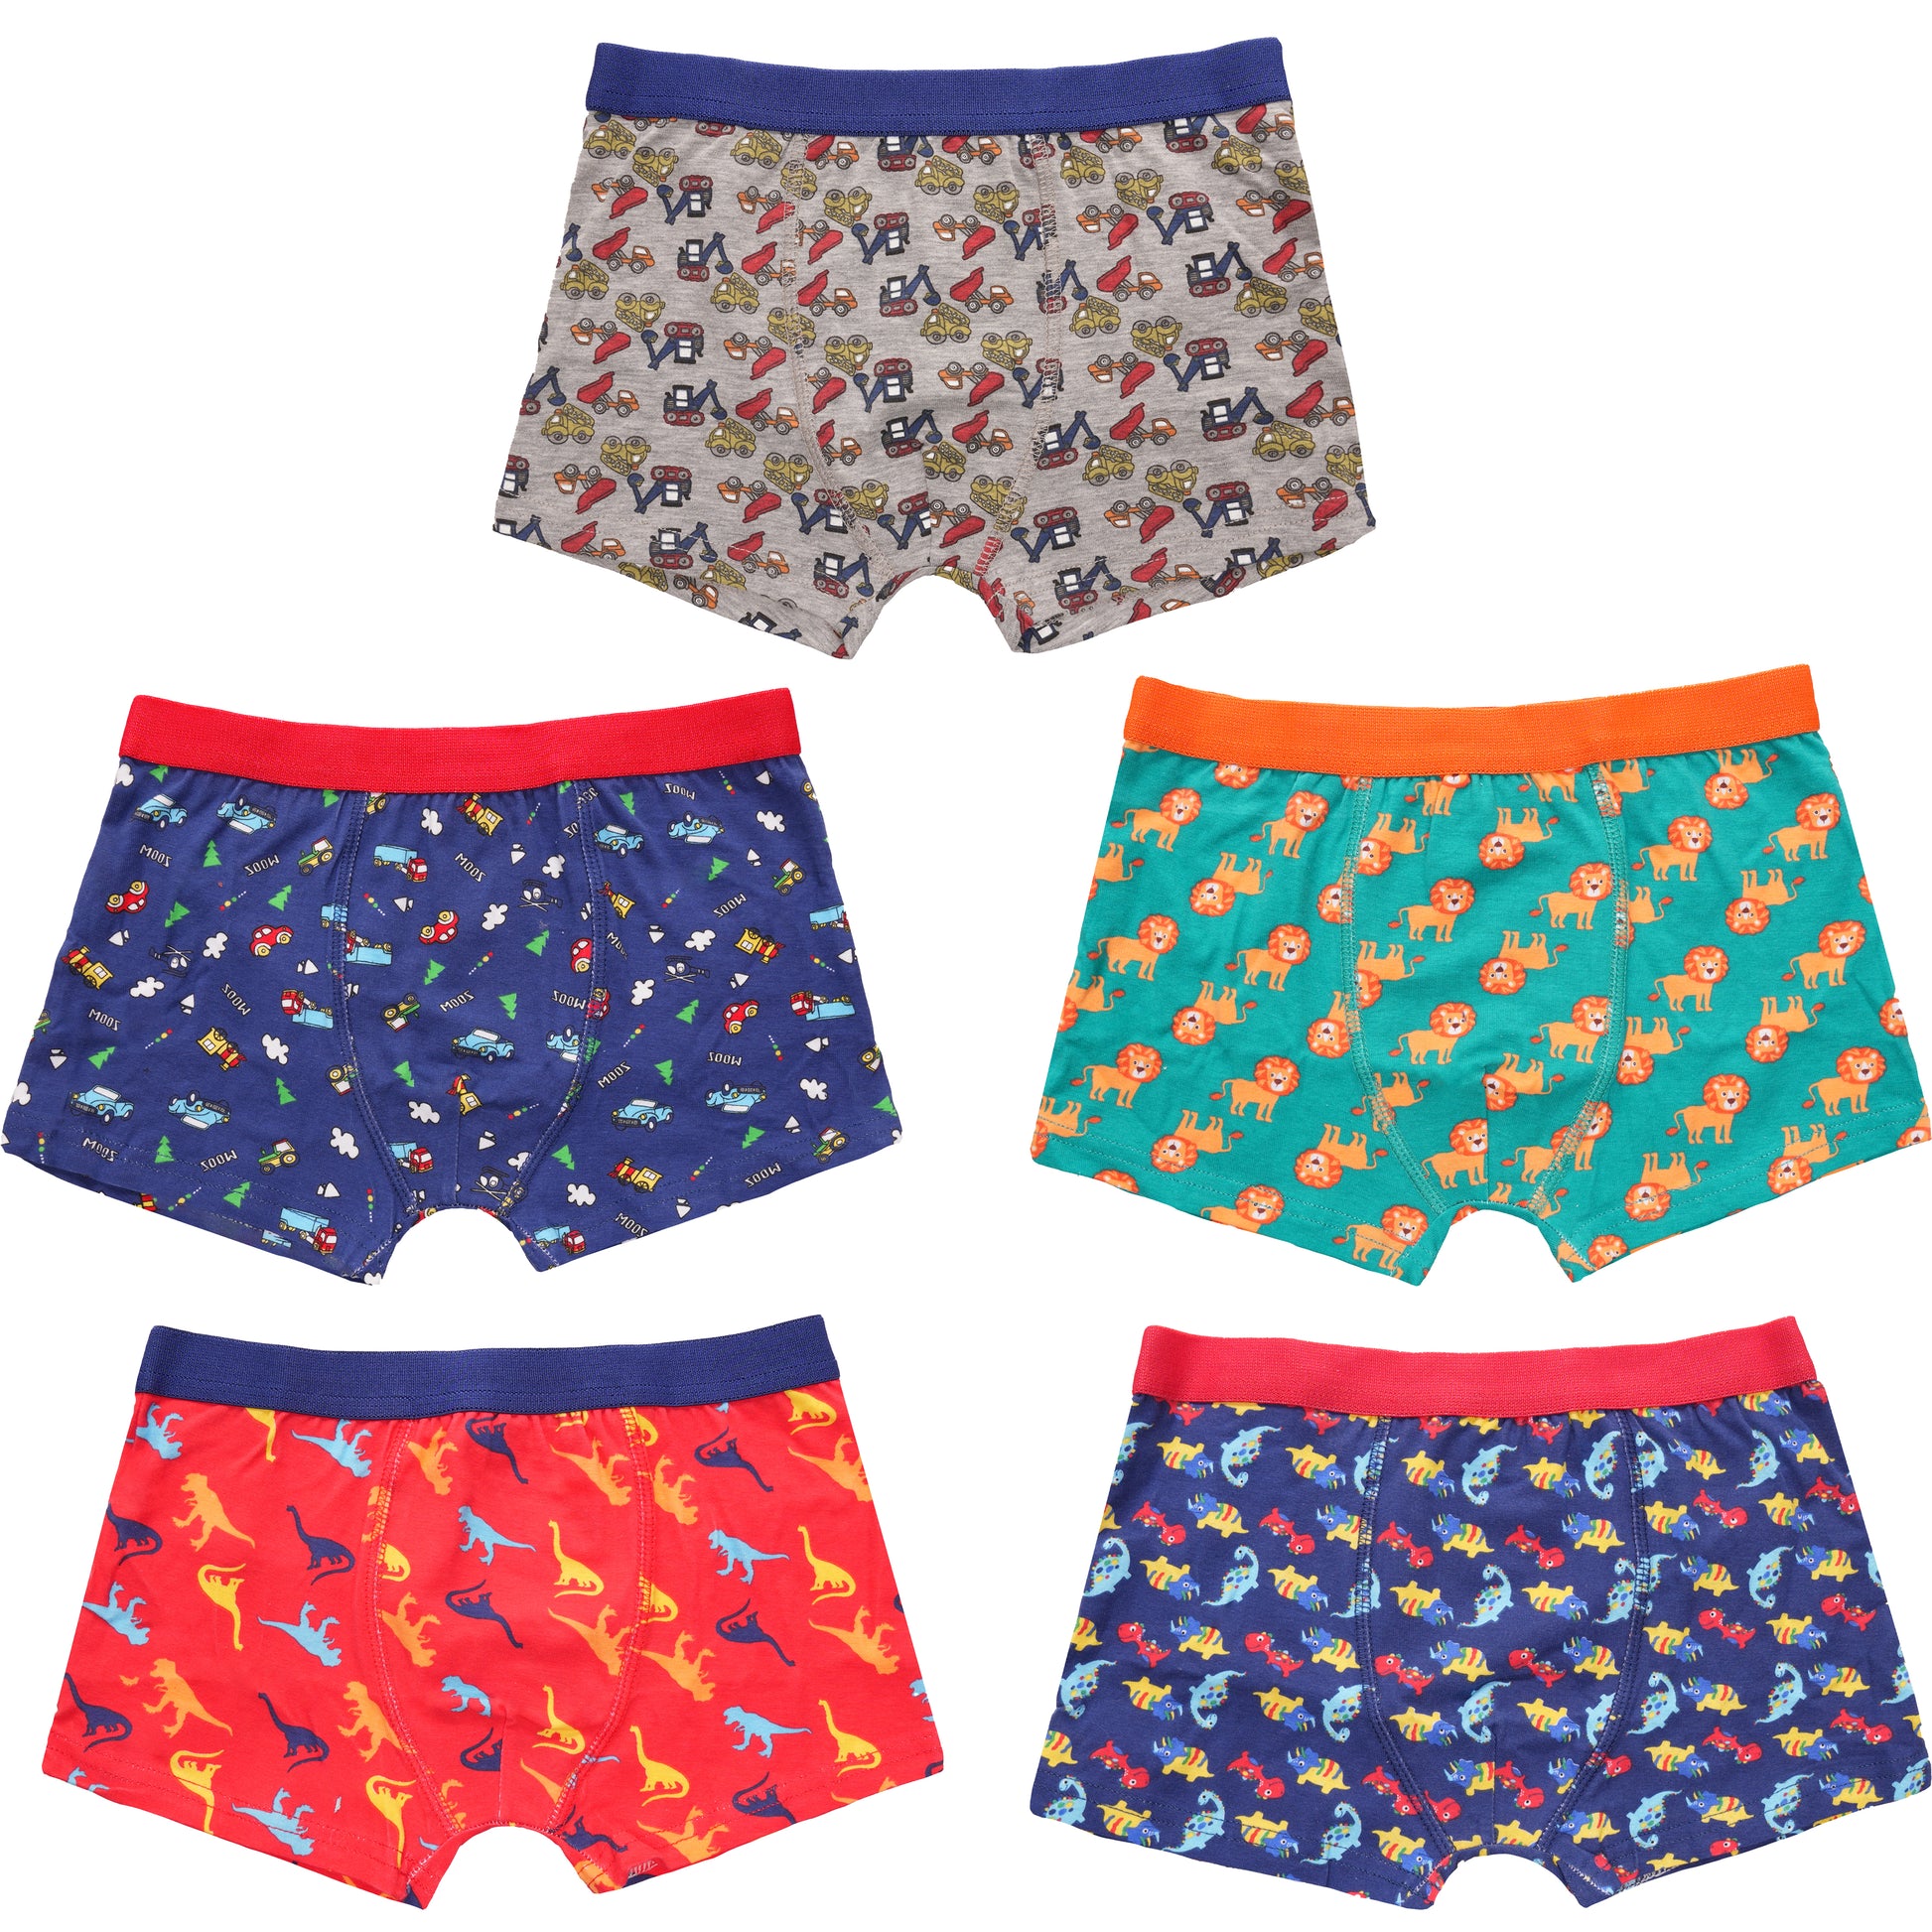 Pack Of 5 Boys Boxers Short, Comfort Fit Underpants Waistband Boxer Trunk. Buy now for £9.00. A Boxer Shorts by Sock Stack. blue, boxer shorts, Boxers, boys, breathable, cars, childrens, comfortable, cotton, design, dinosaur, Fit, flexibility, green, grey